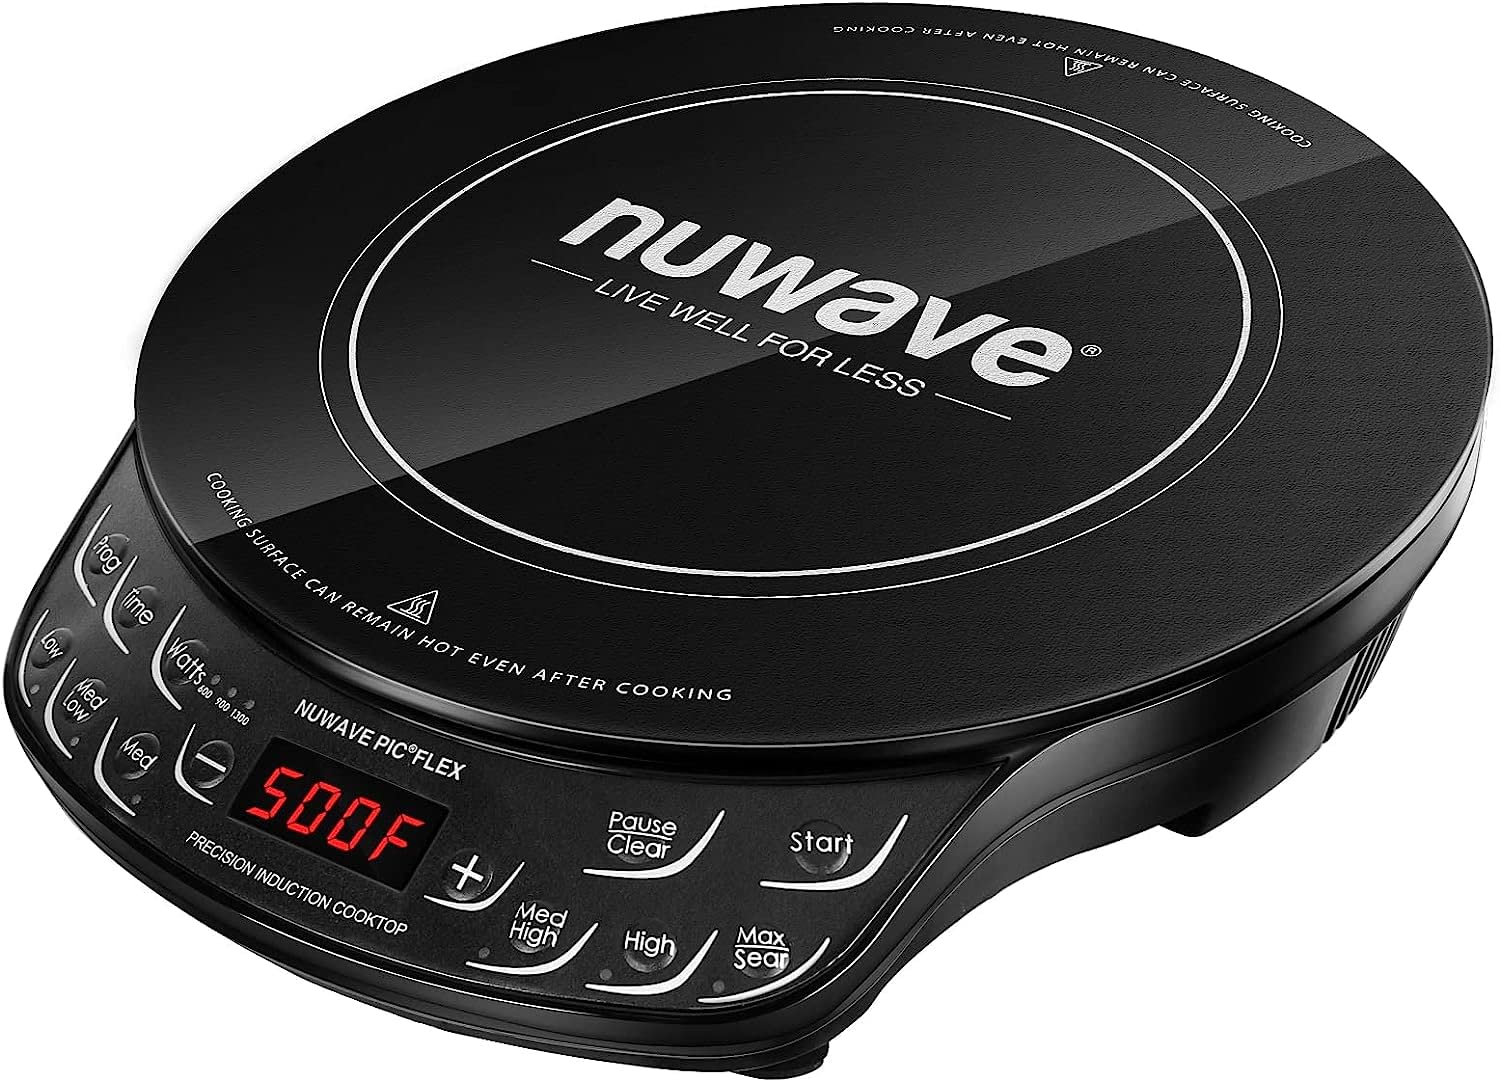 Nuwave Flex Precision Induction Cooktop, 10.25” Shatter-Proof Ceramic Glass, 6.5” Heating Coil, 45 Temps from 100°F to 500°F, 3 Wattage Settings 600, 900 & 1300 Watts (Renewed)